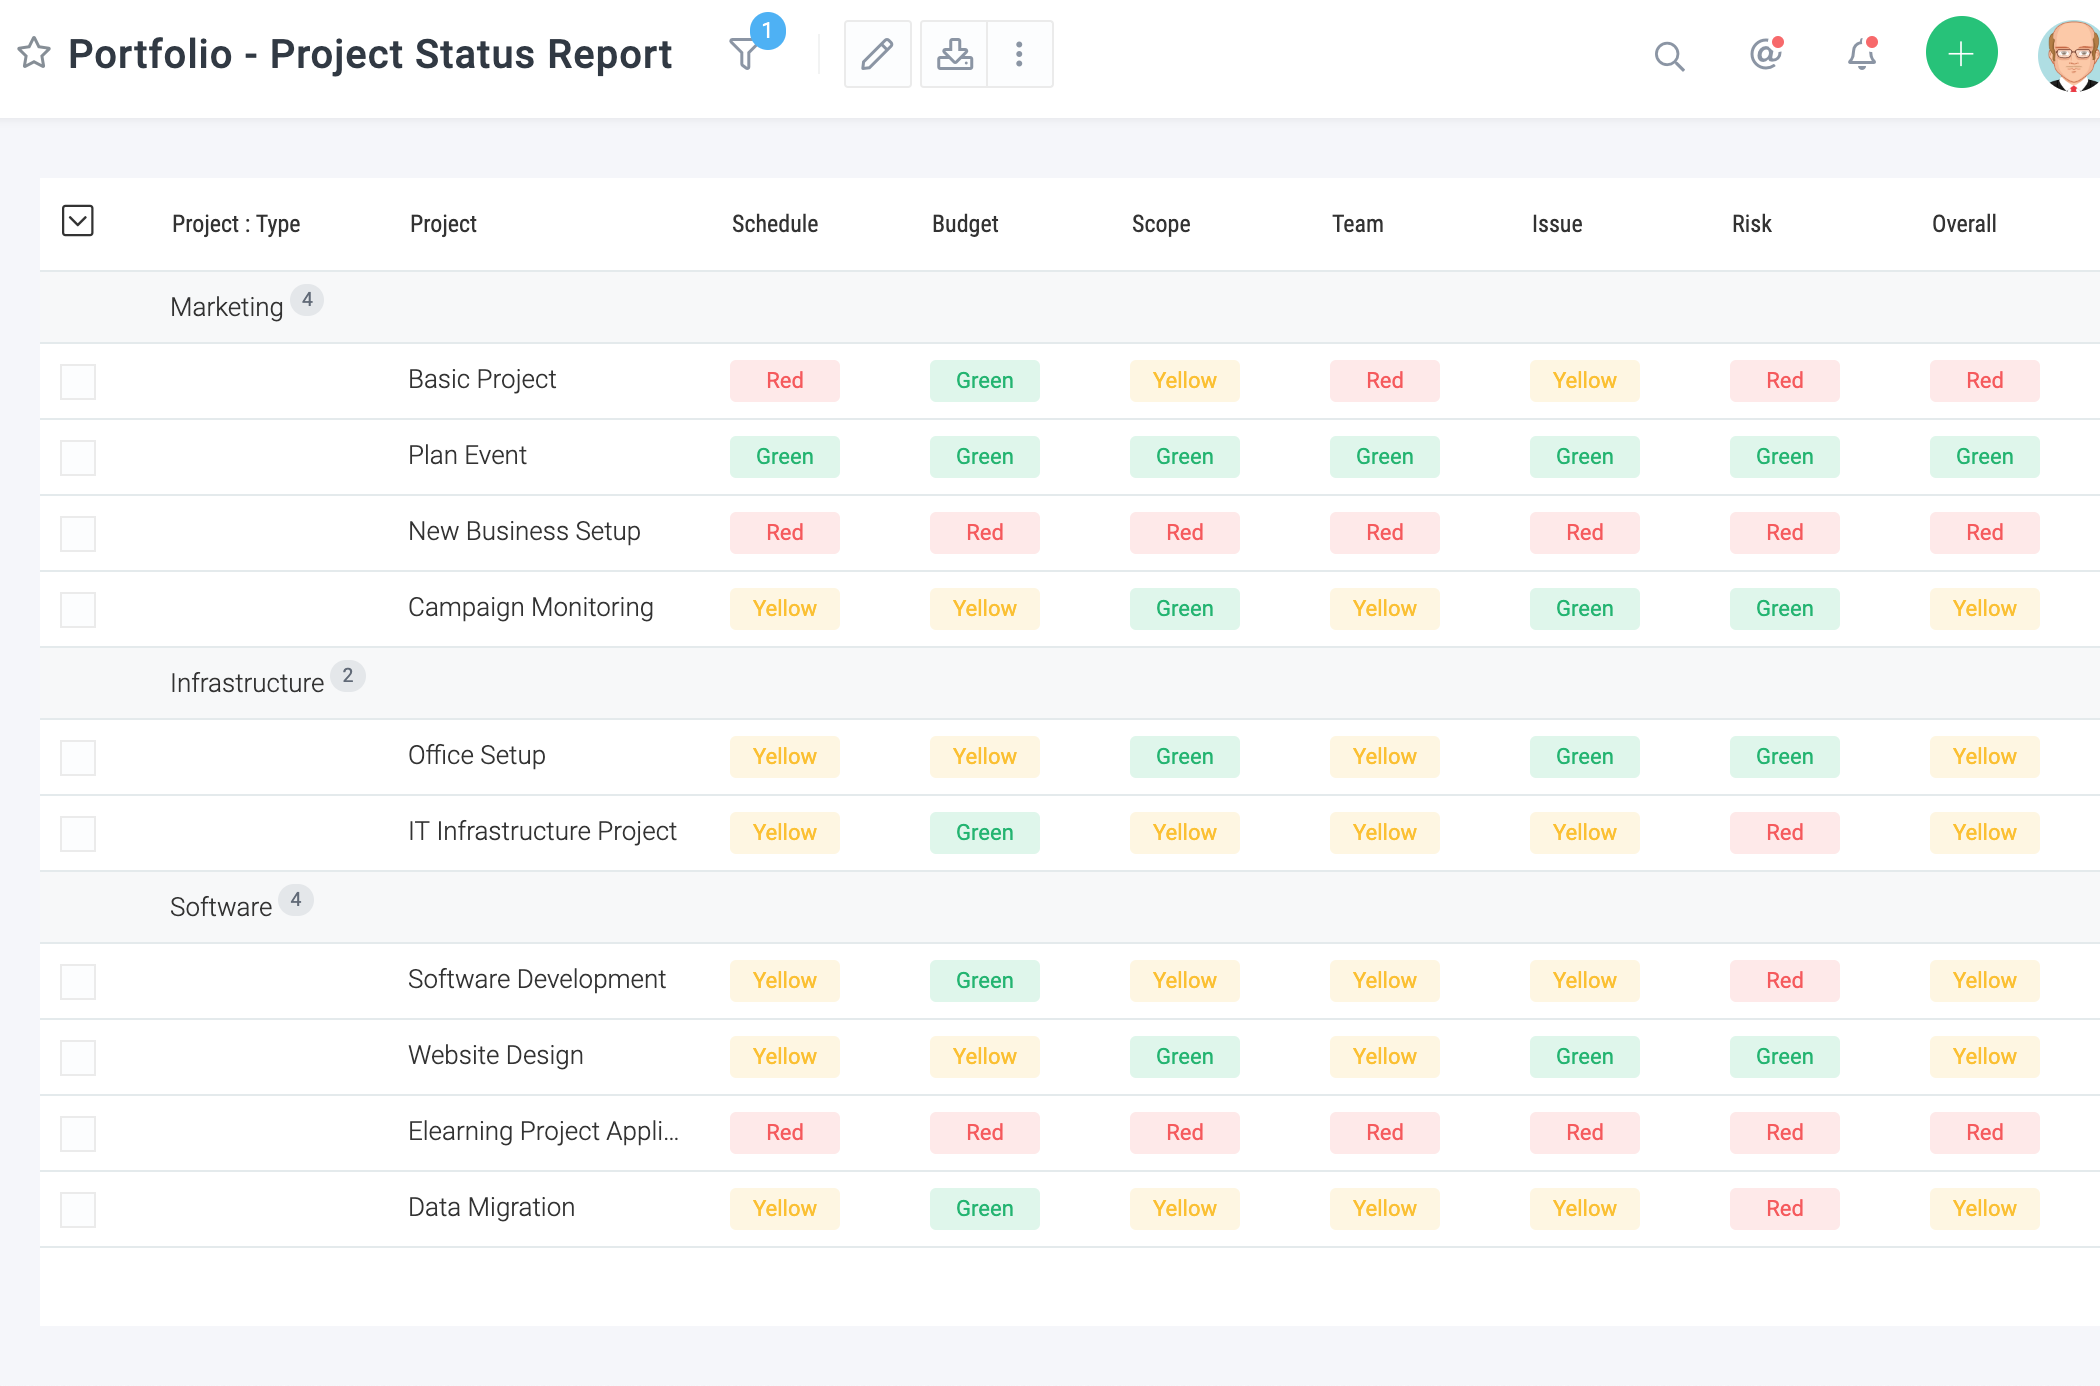 Celoxis Software - View of your project portfolio with Celoxis' project portfolio status report, gain valuable insights into project progress, timelines, and milestones. Easily track project health, identify risks, and make data-driven decisions.